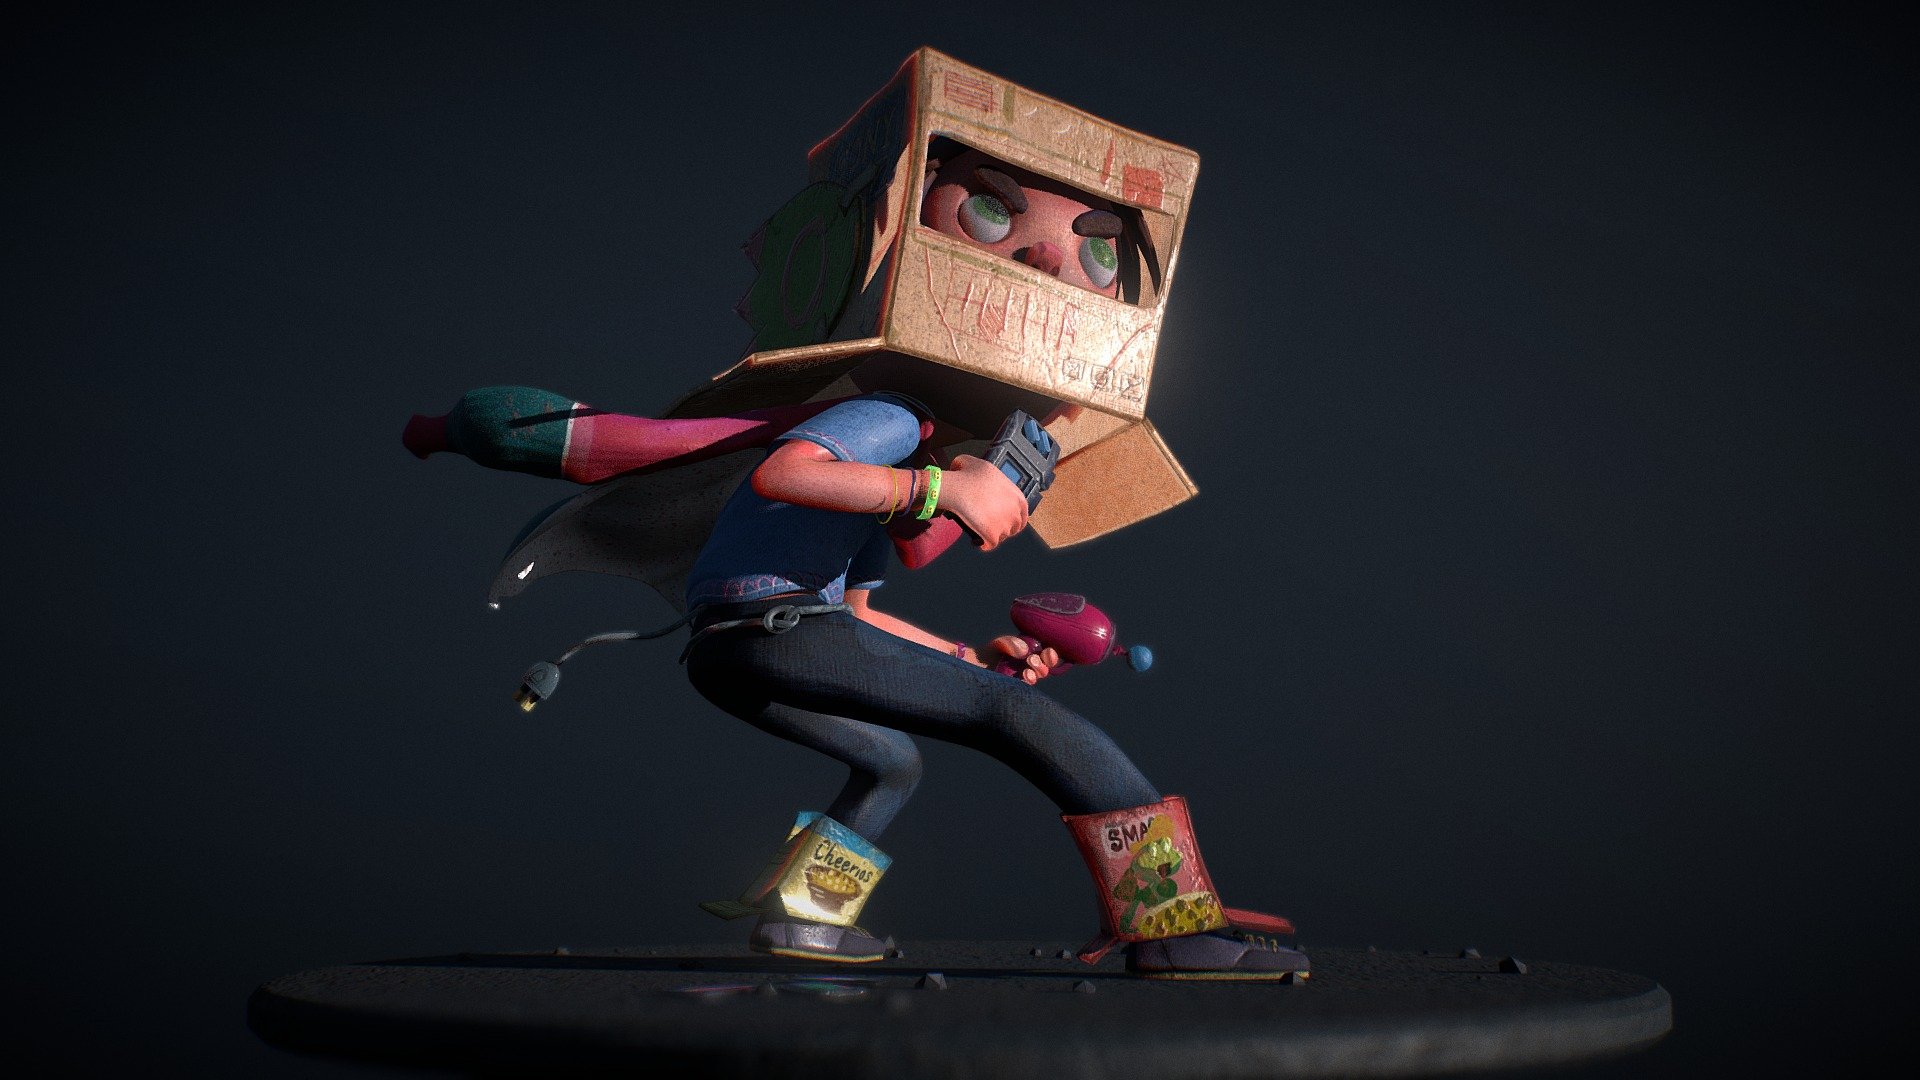 A 3D Sculpt based on a Concept by Dani Diez.

I attempted to recreate his illustration in 3D.
Check out Dani's concept here: http://www.danidiez.com/characters#20
See more of his work at www.danidiez.com 

Modeled in ZBrush, textured in Substance Painter.

More of my work: www.lucastruchen.com - Captain Childhood - 3D model by lstn (@LucaStruchen) 3d model